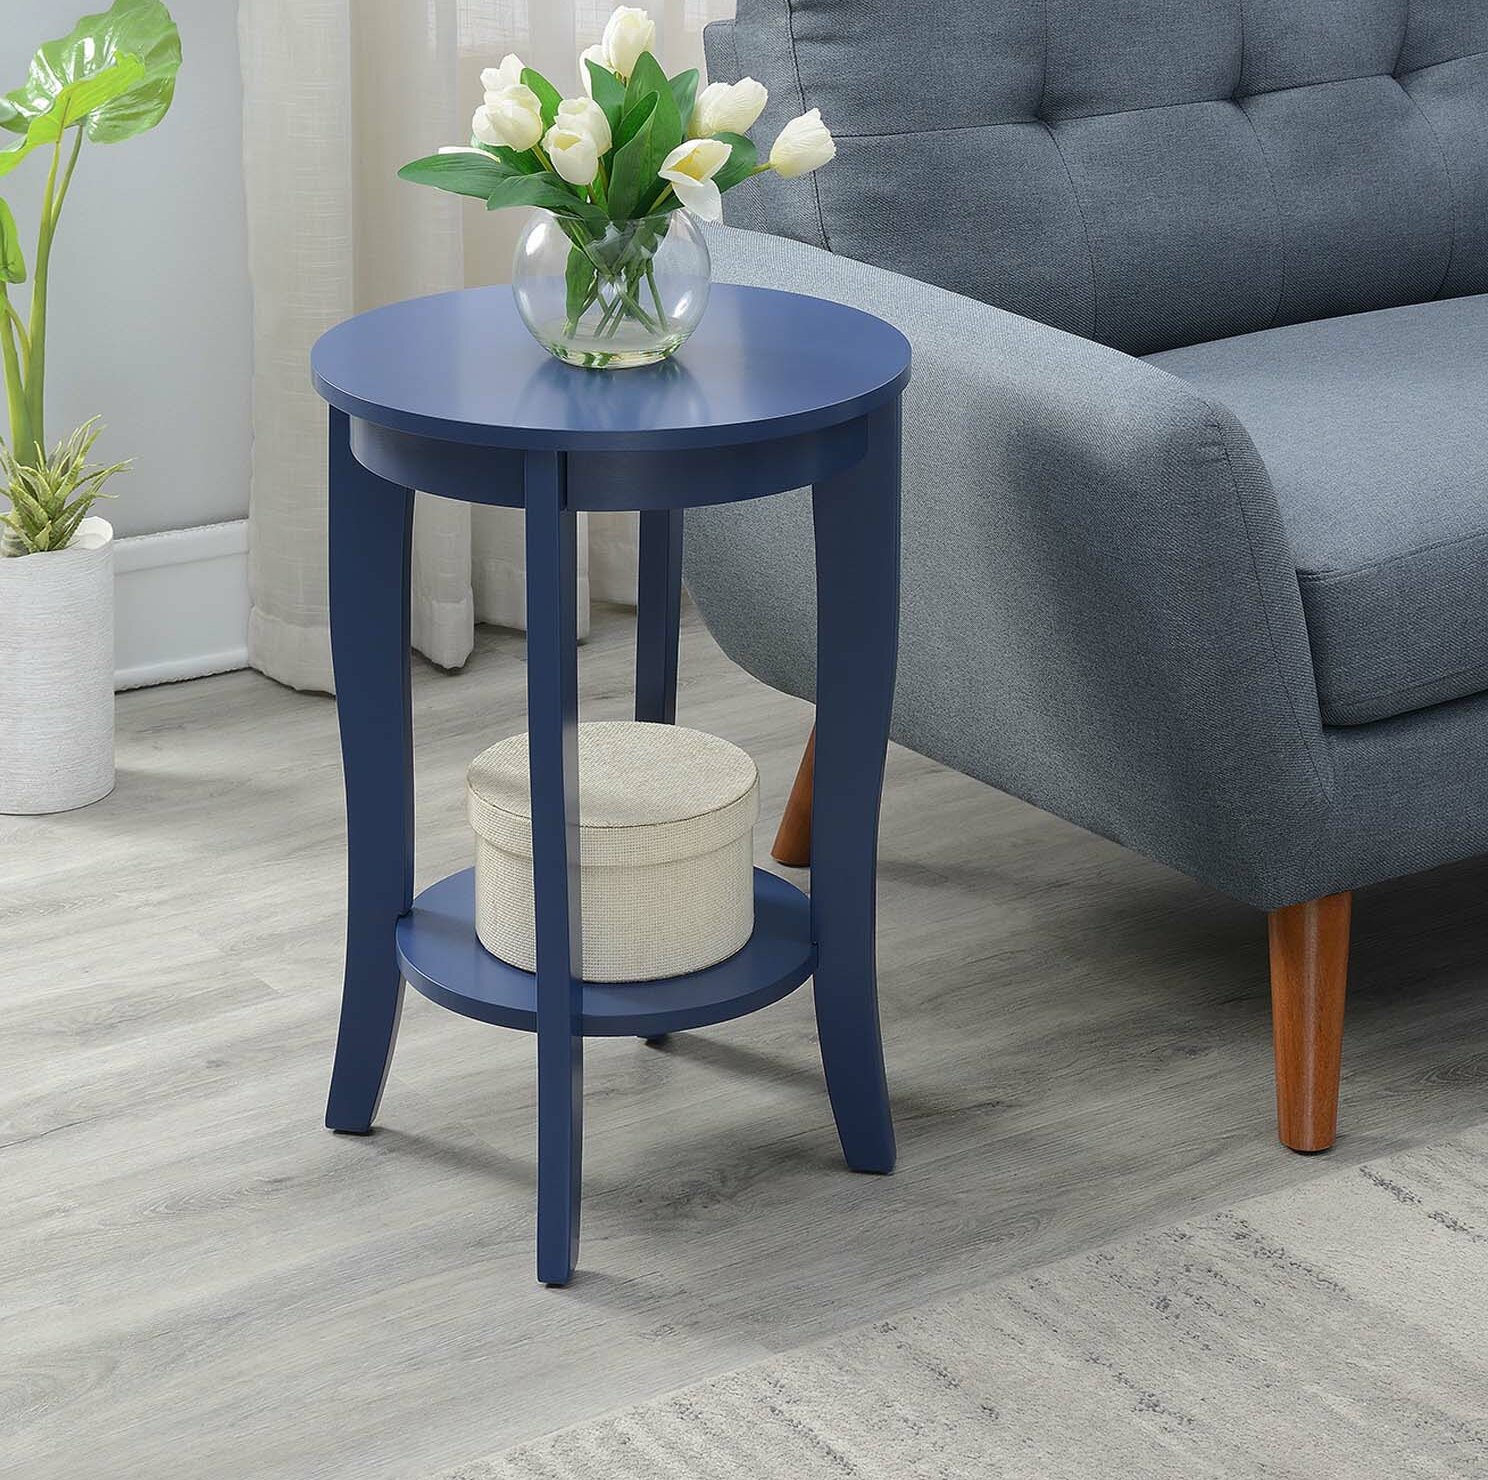 Round Accent Tables With Storage Shelf